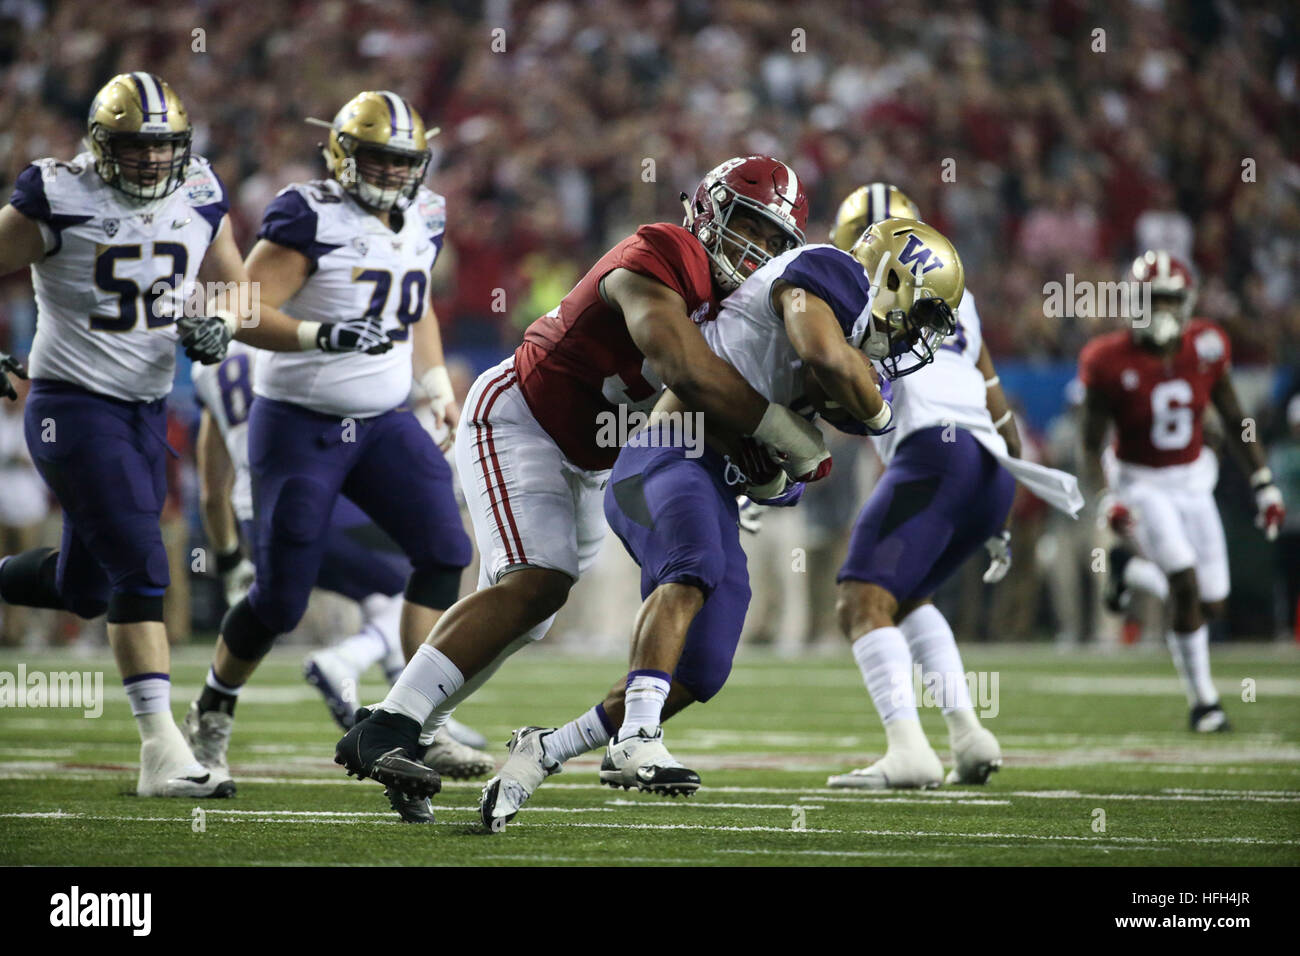 Atlanta, Georgia, USA. 31st Dec, 2016. MONICA HERNDON | Times.Alabama Crimson Tide defensive lineman Jonathan Allen (93) stops Washington Huskies running back Myles Gaskin (9) for a loss of 3 yards during the second quarter of the Chick Fil A Peach Bowl at the Georgia Dome in downtown Atlanta on Saturday December 31, 2016. © Monica Herndon/Tampa Bay Times/ZUMA Wire/Alamy Live News Stock Photo